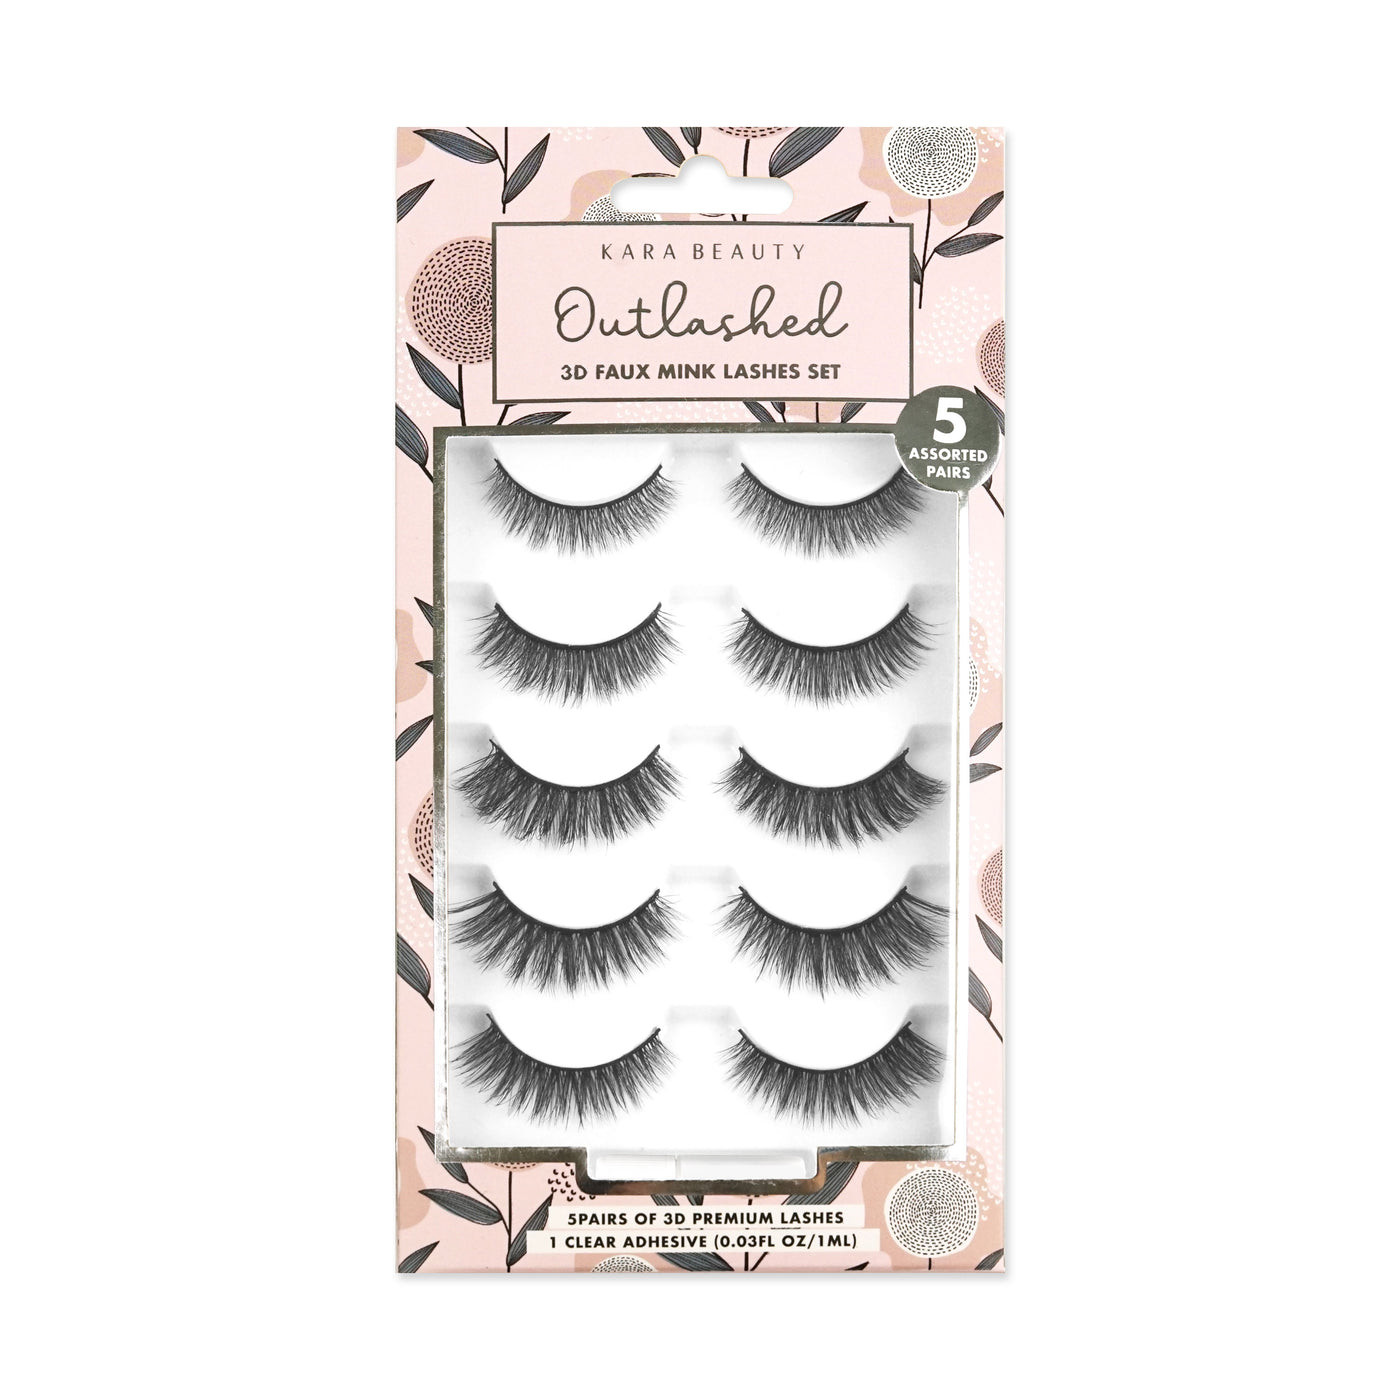 KA5206 OUTLASHED 3D Faux Mink Lashes 5 ASSORTED PAIRS